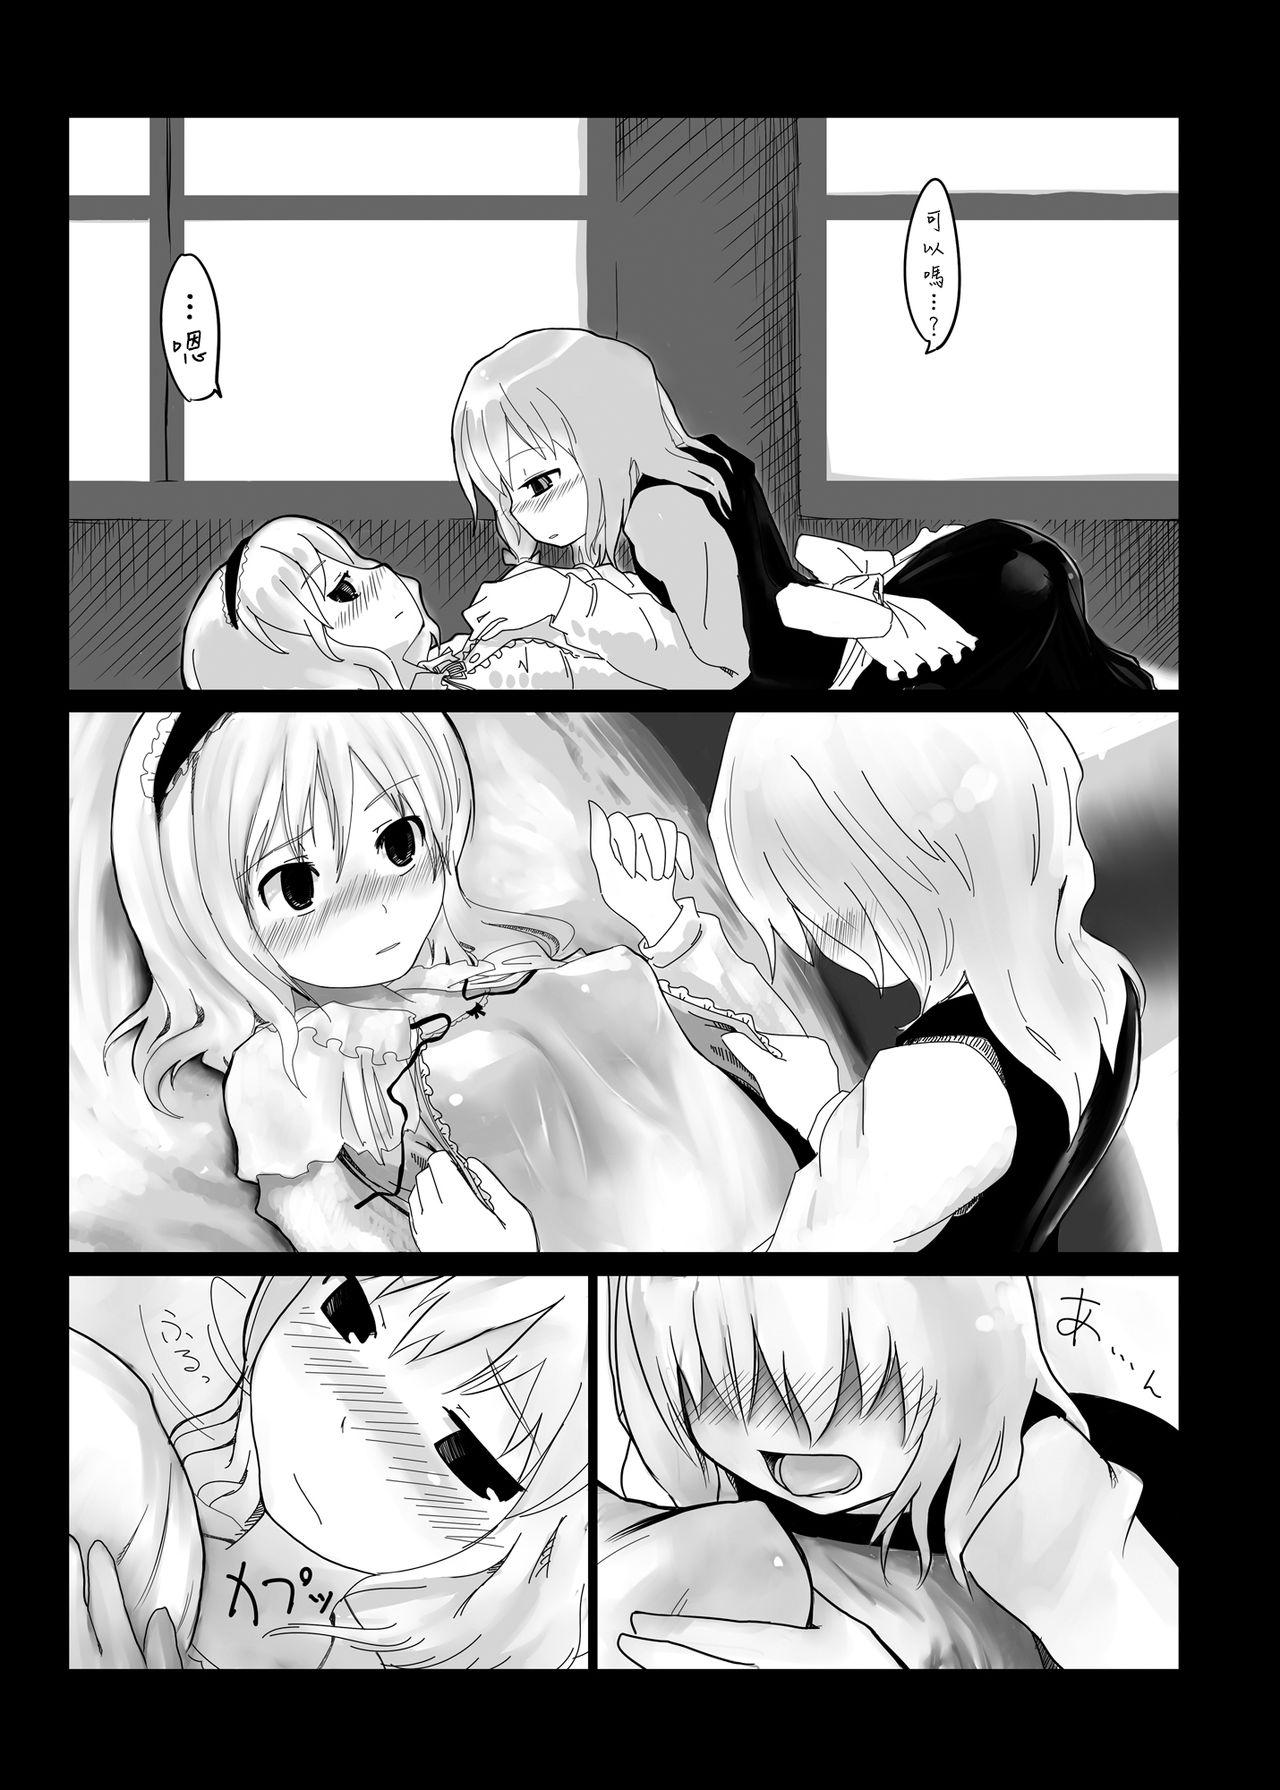 Wetpussy Touhou Ero Atsume. - Touhou project Wives - Page 7